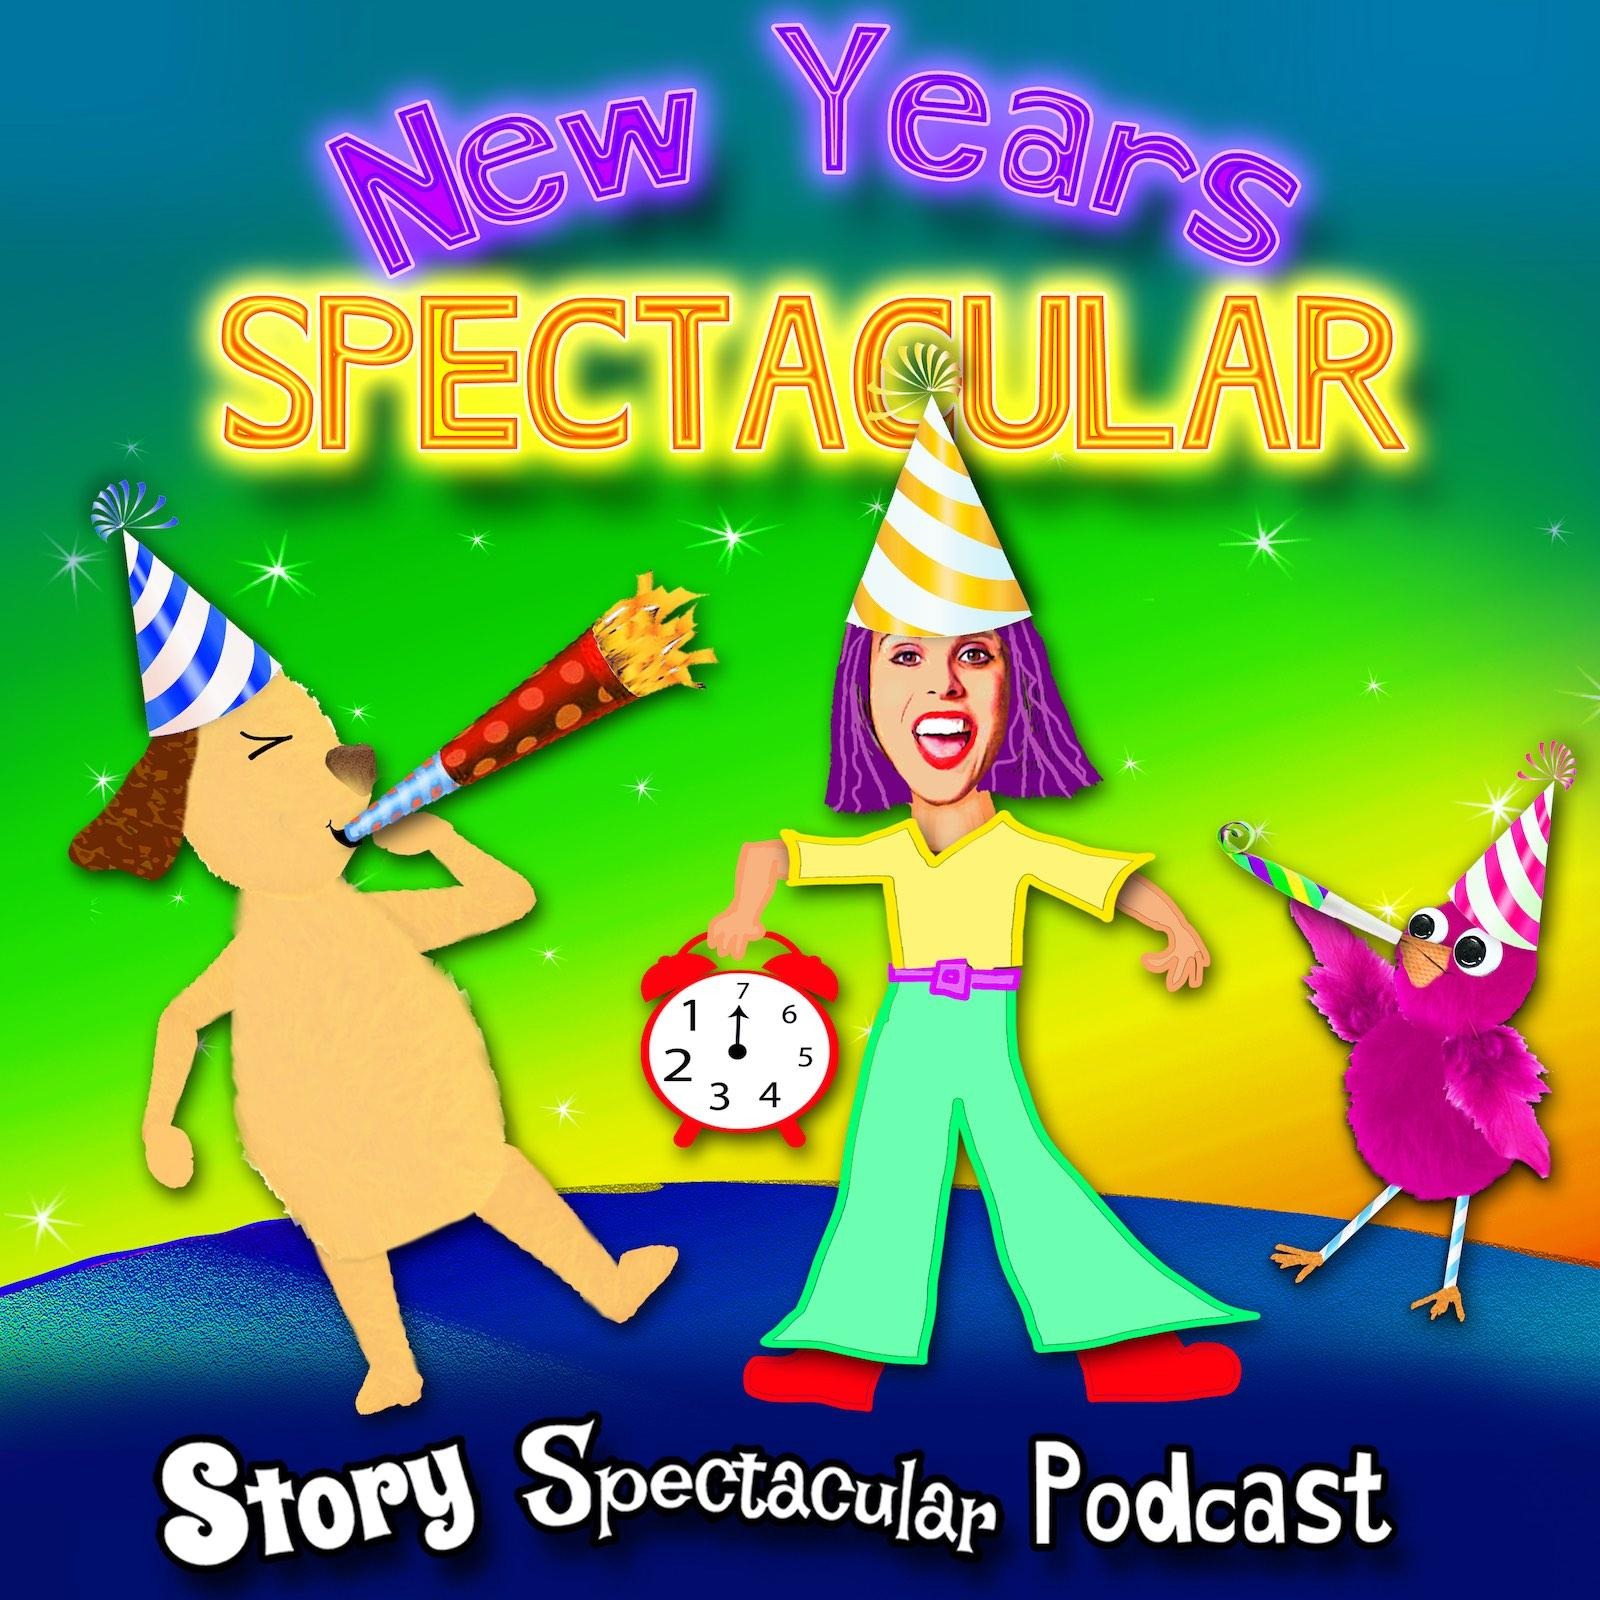 New Years SPECTACULAR